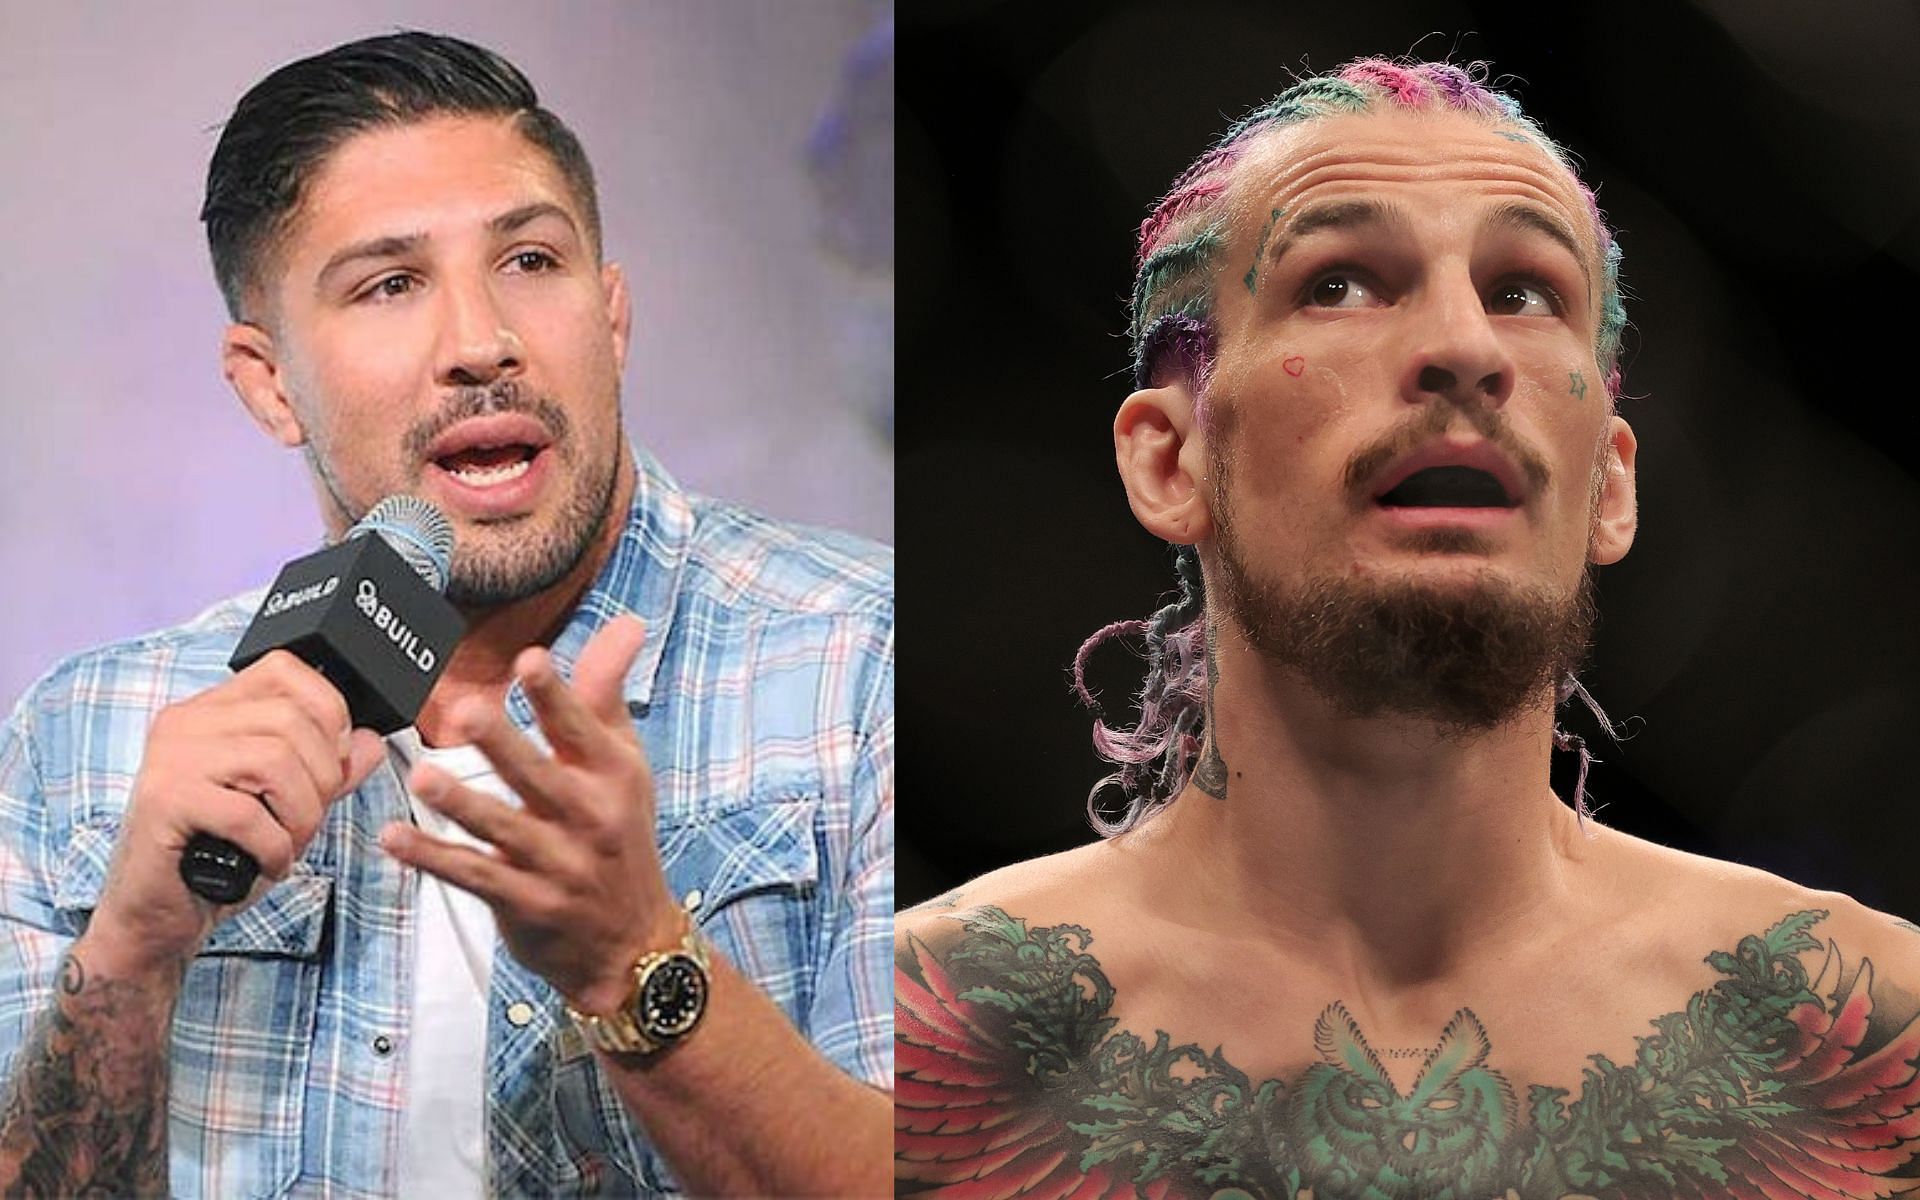 Brendan Schaub (left) and Sean O&#039;Malley (right). [Image courtesy: left image from onnit.com, right image from Getty Images]